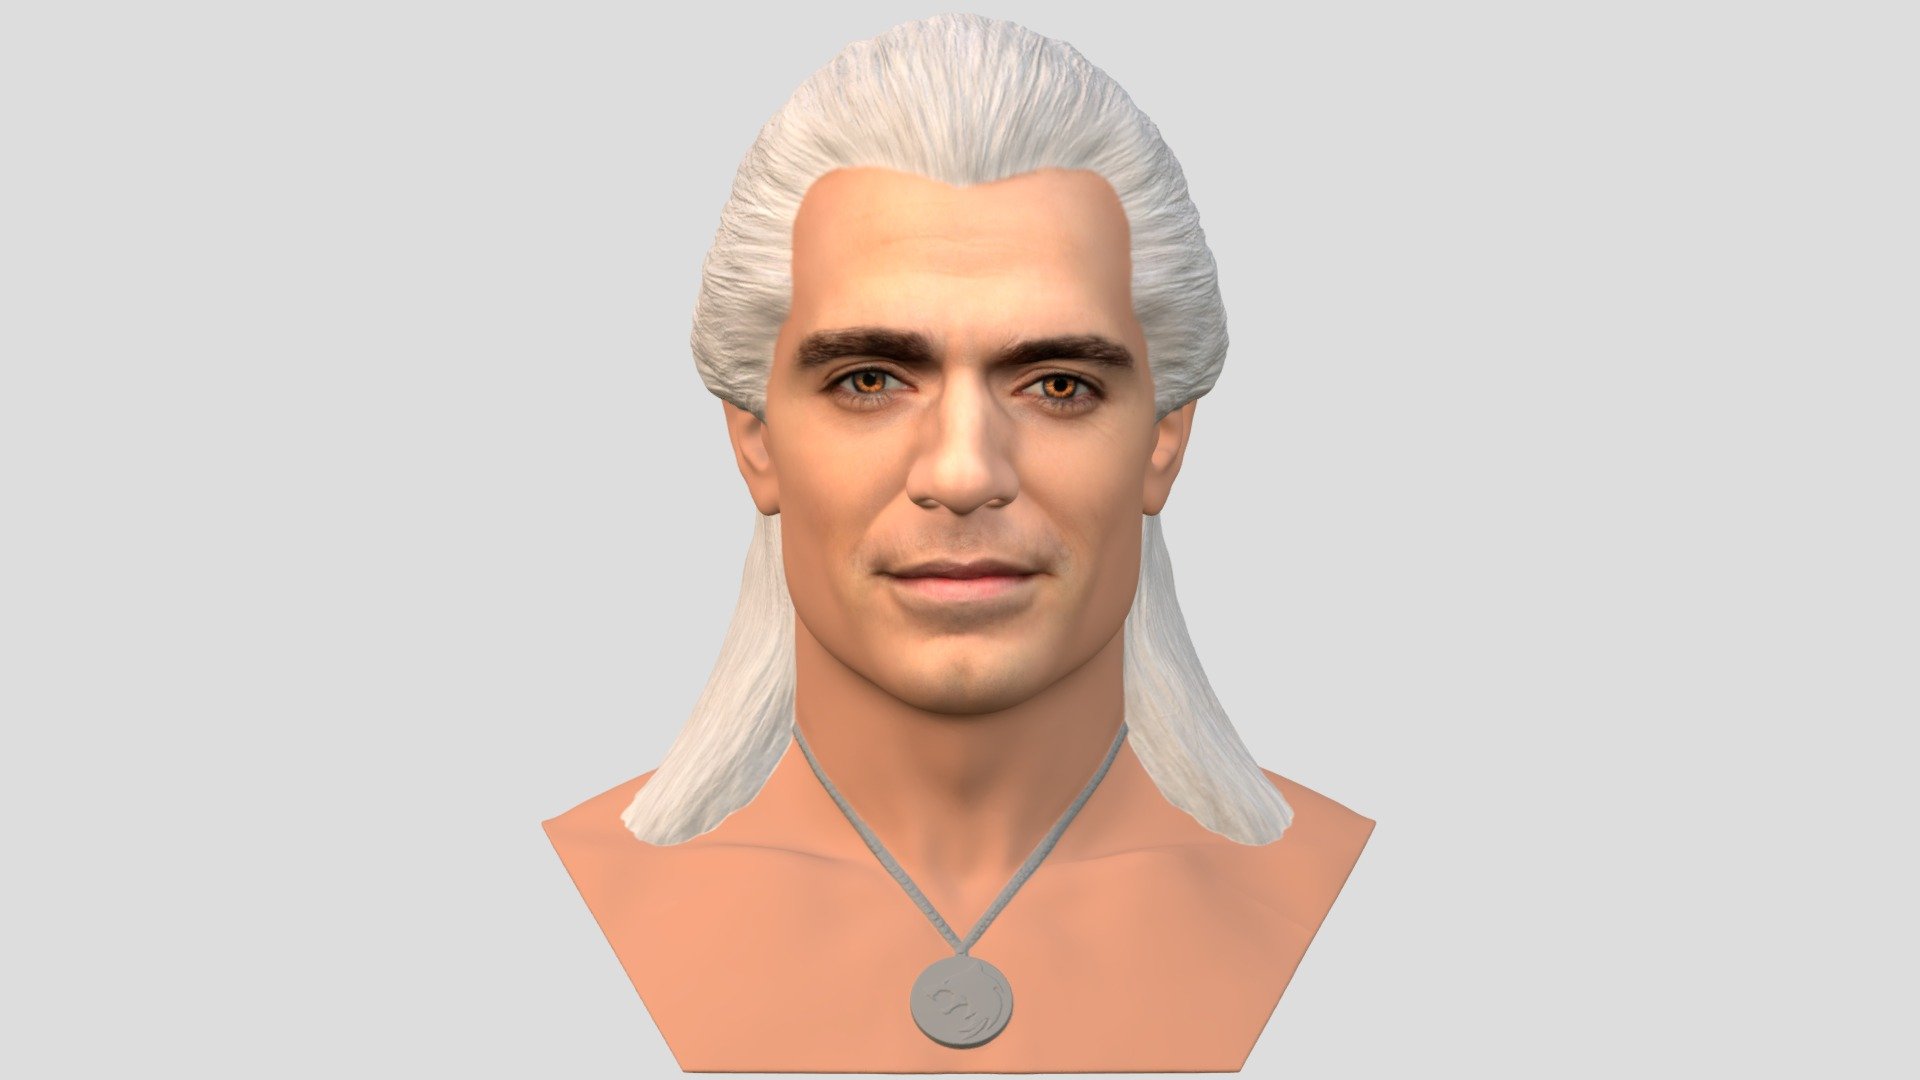 Geralt The Witcher bust full color 3D printing